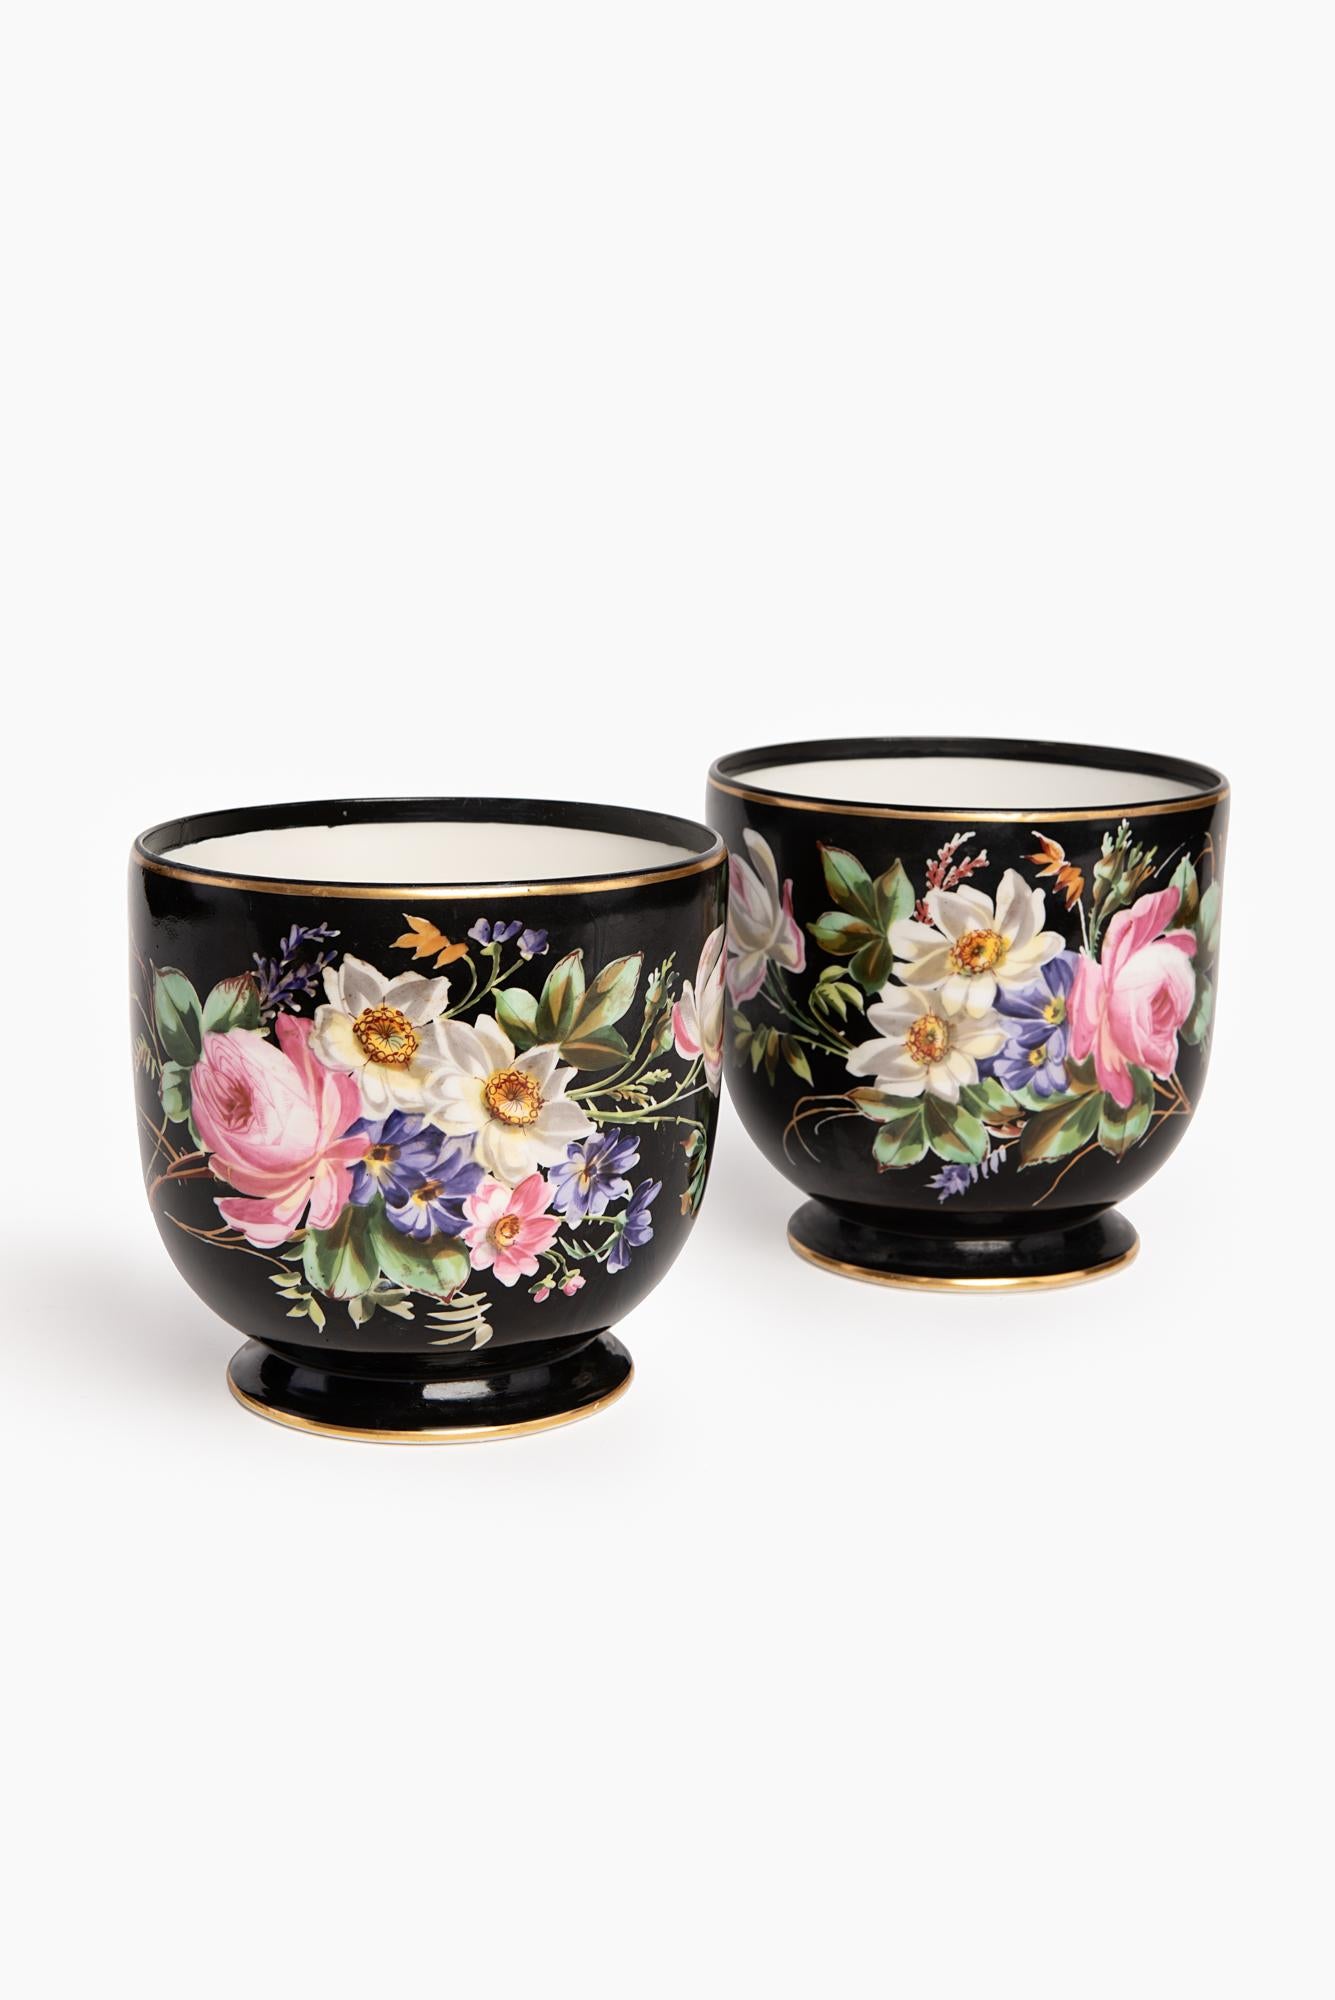 We kindly suggest you read the whole description, because with it we try to give you detailed technical and historical information to guarantee the authenticity of our objects.
Elegant and refined pair of black porcelain cachepots; the delicate